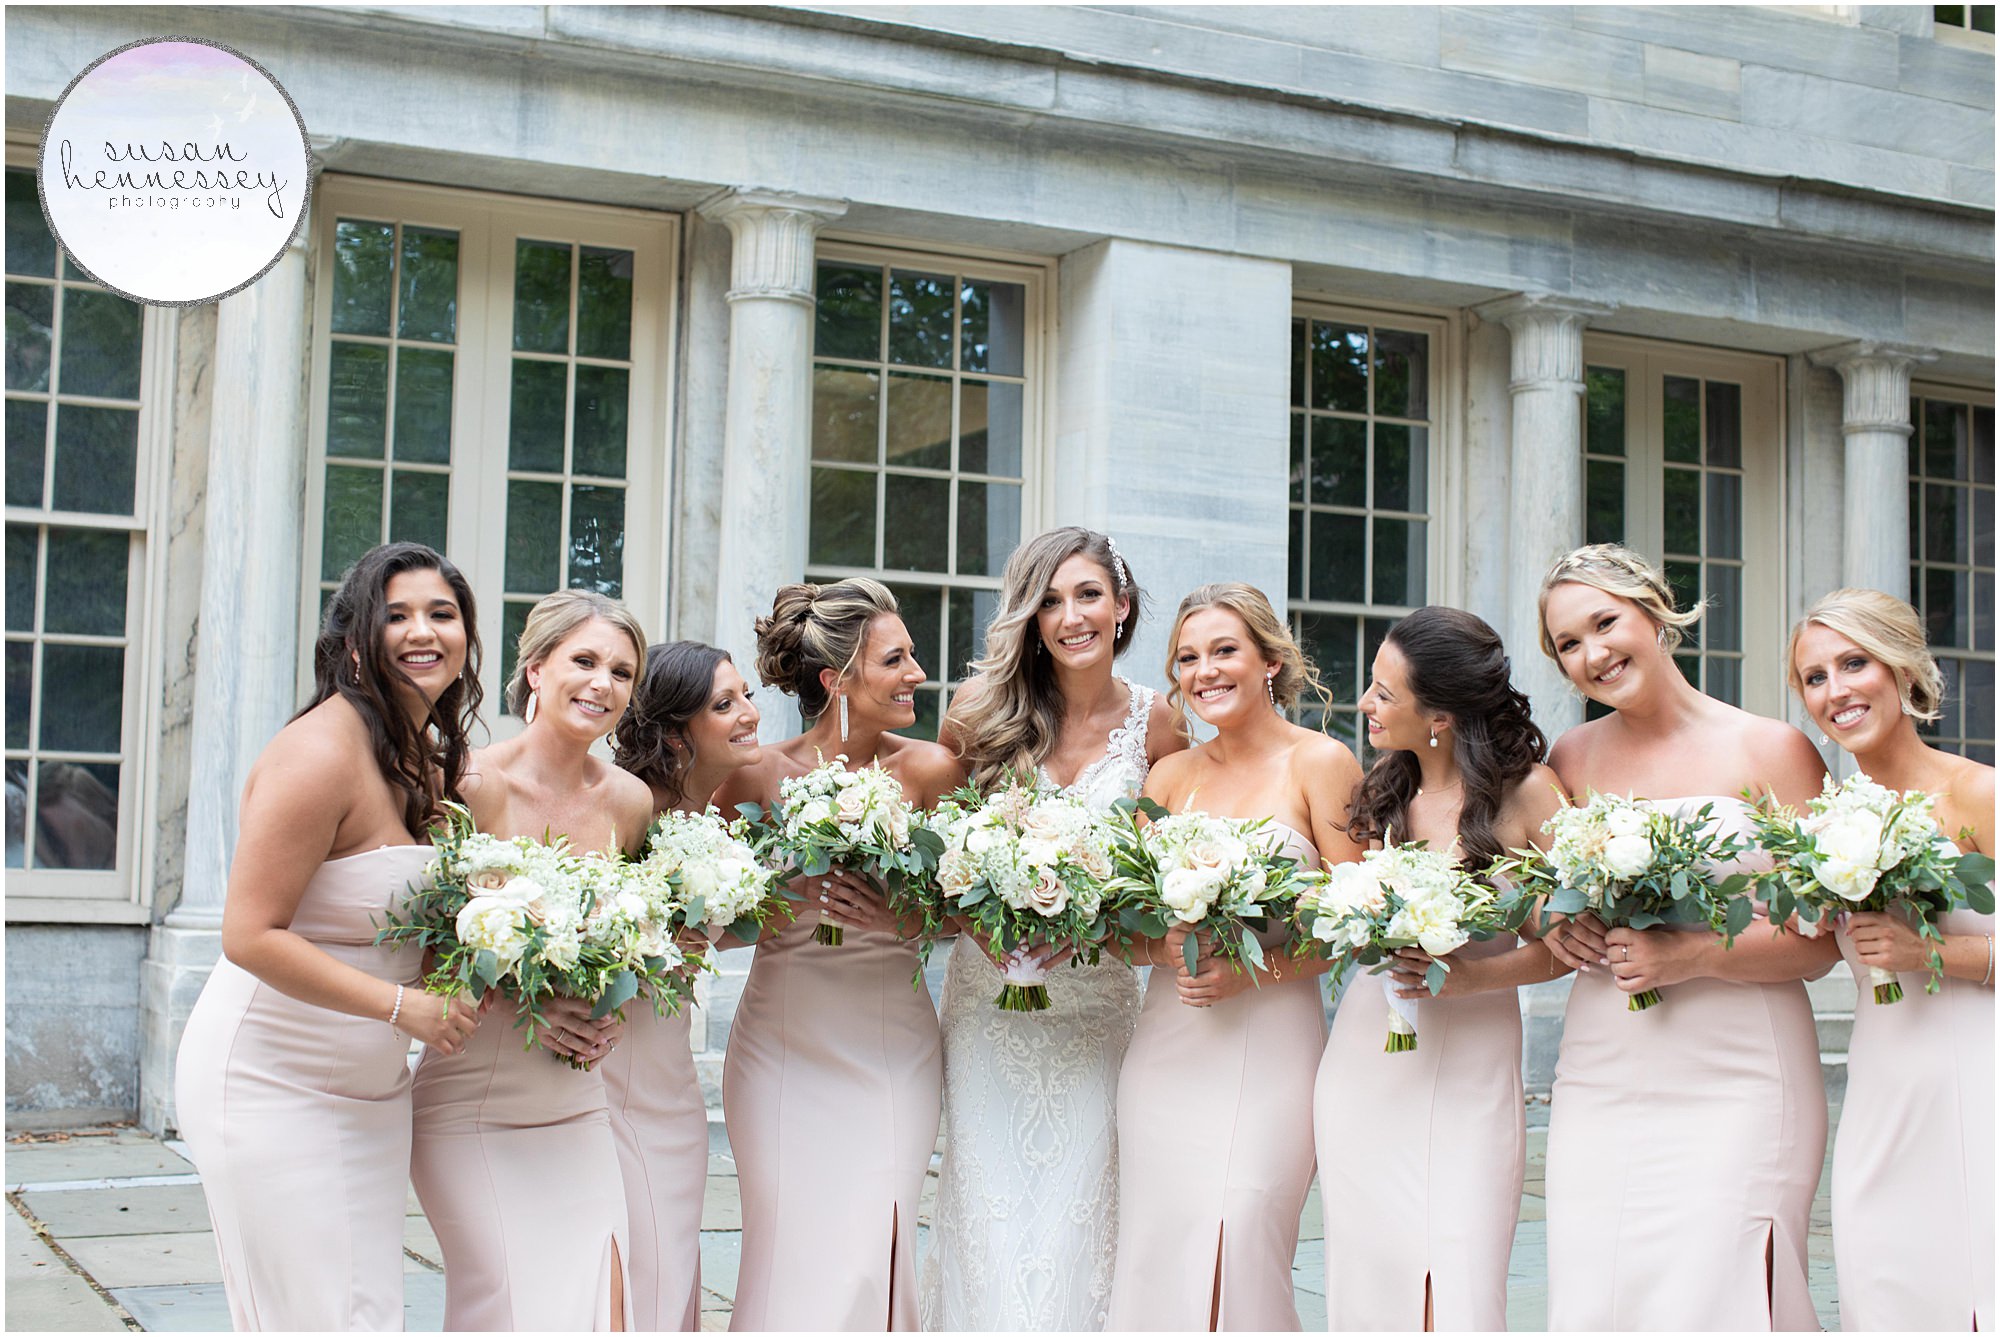 Bridesmaids in pink at merchant exchange building at Union Trust wedding.